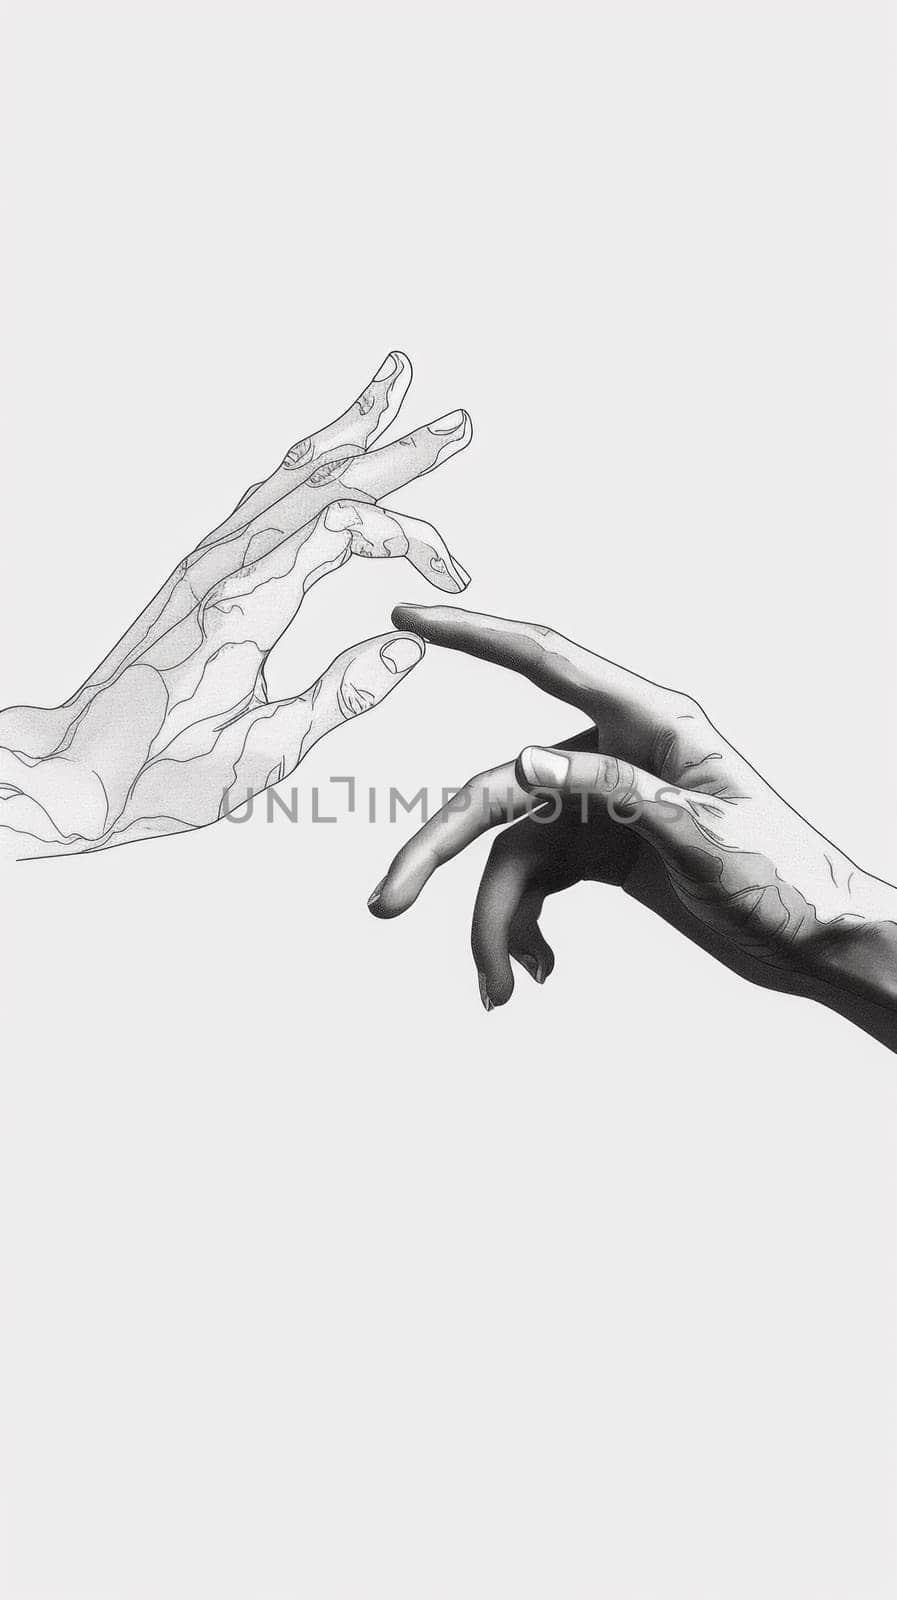 A drawing of two hands reaching for each other